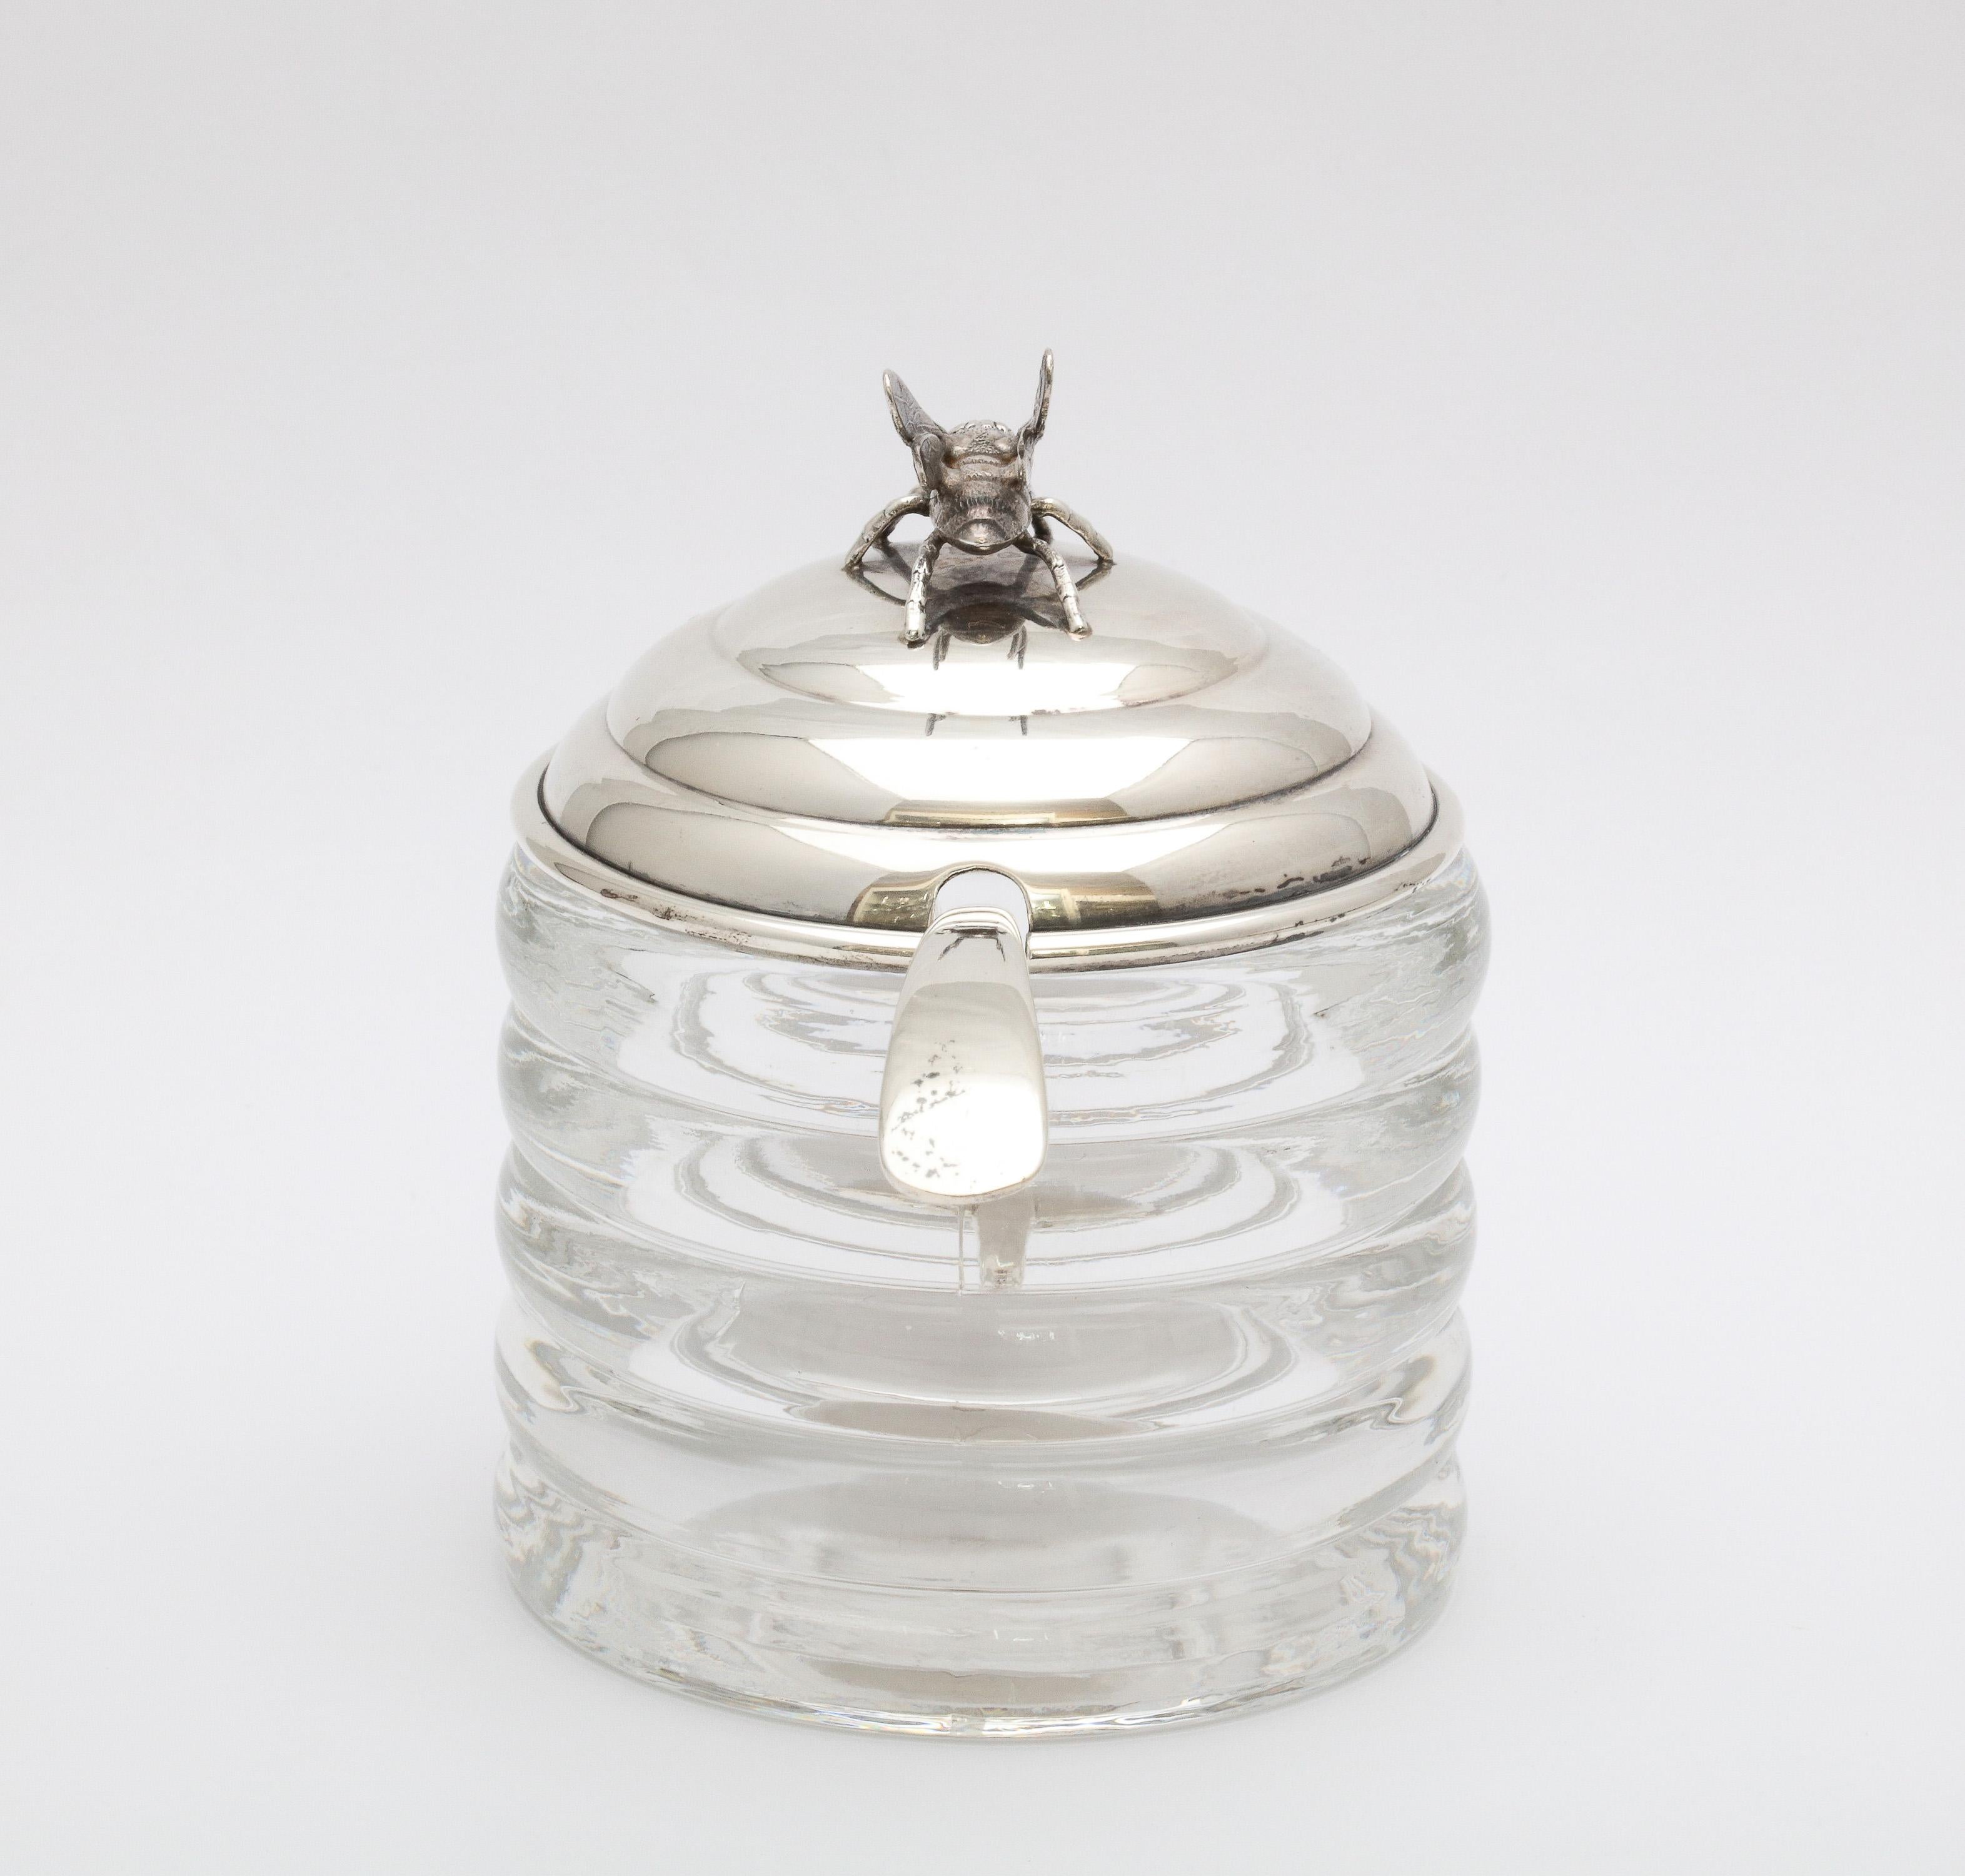 Art Deco Period Sterling Silver-Mounted Beehive-Form Honey Jar With Spoon 1